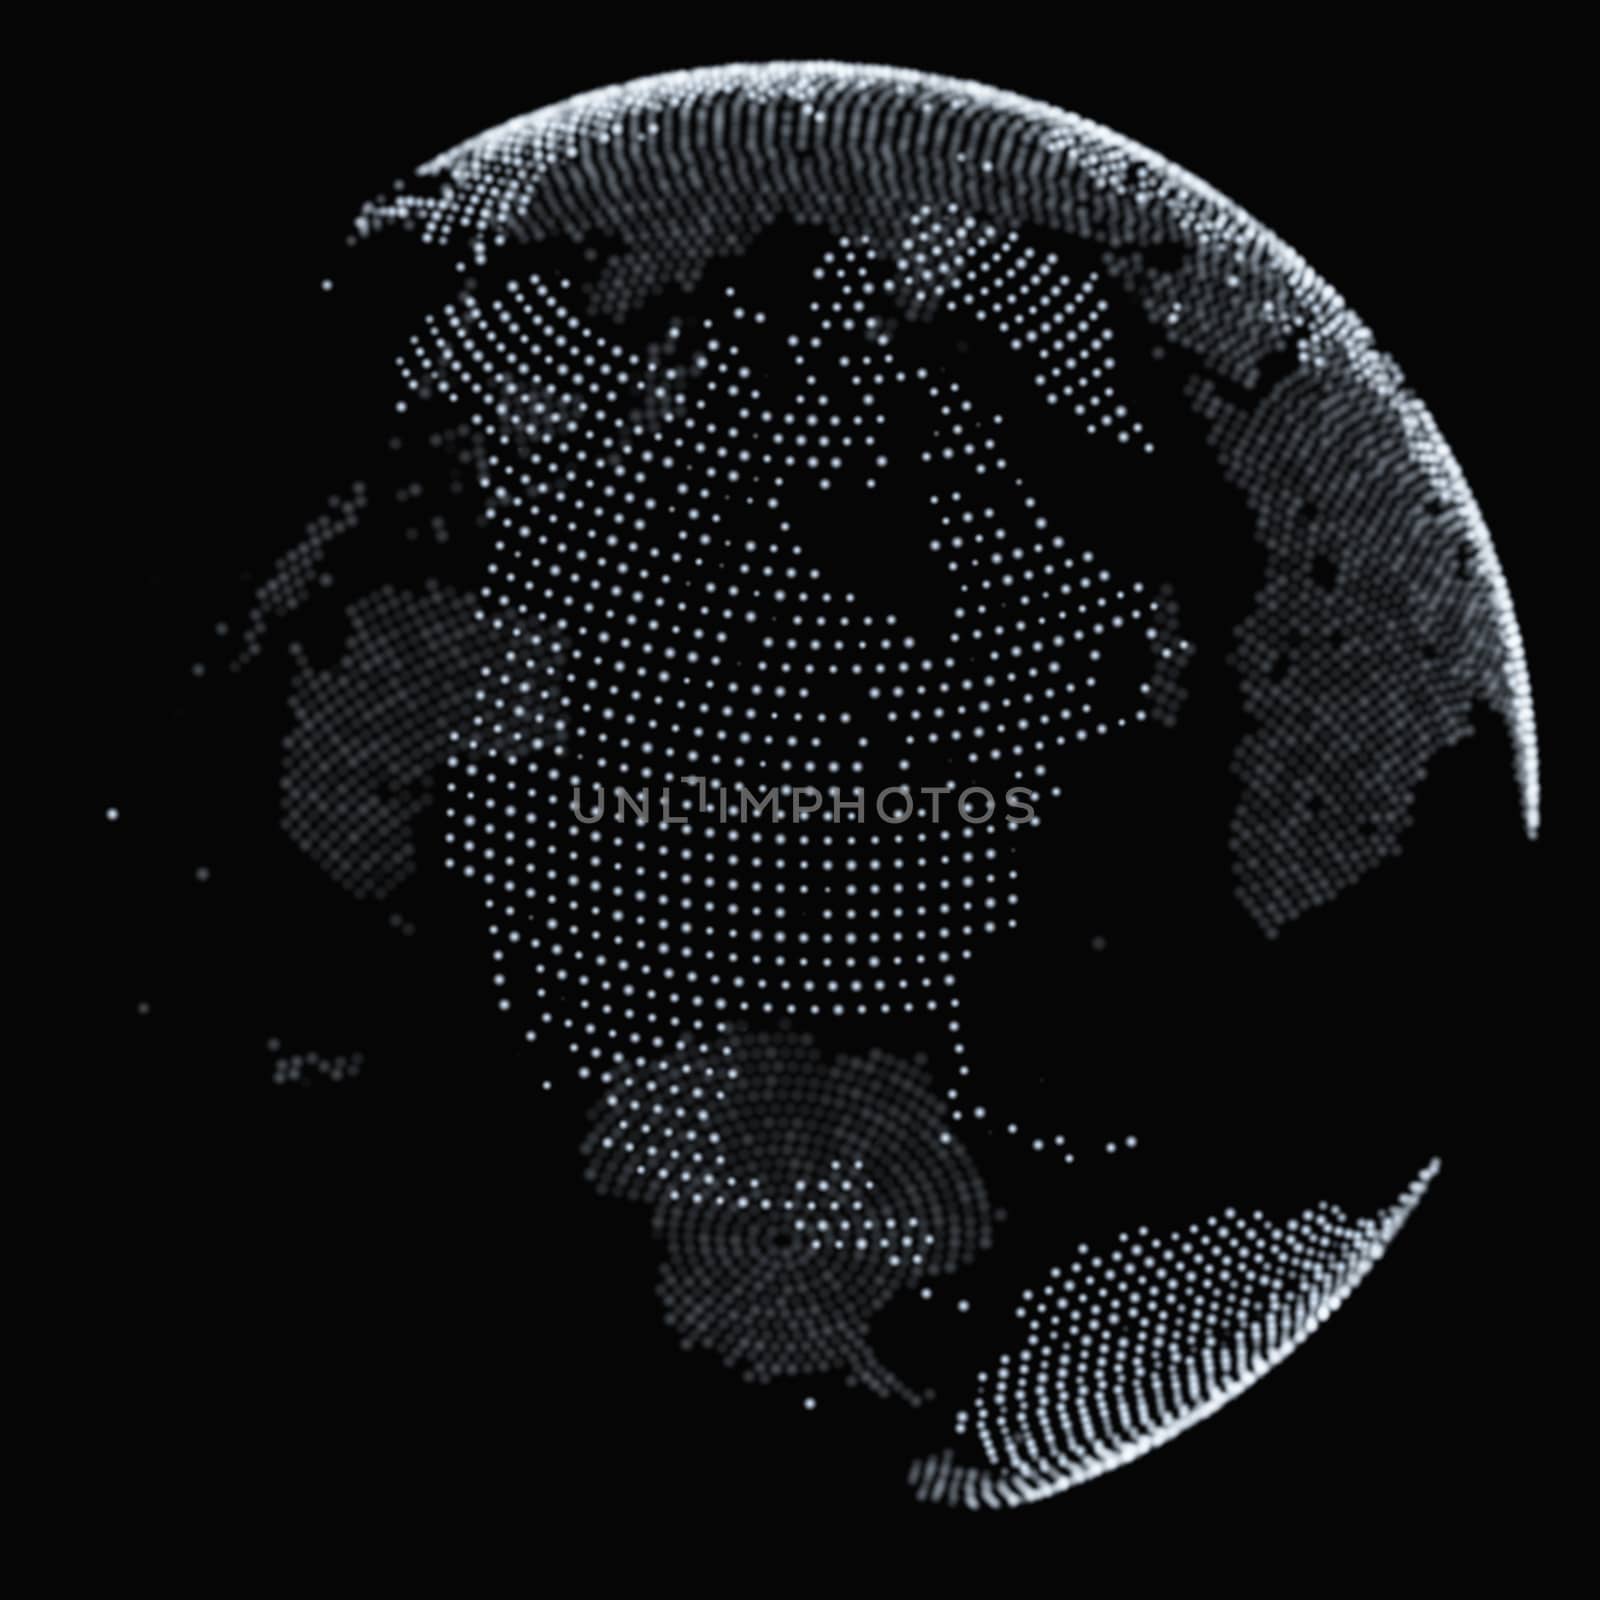 Dotted world globe. Template for your design. 3d illustration